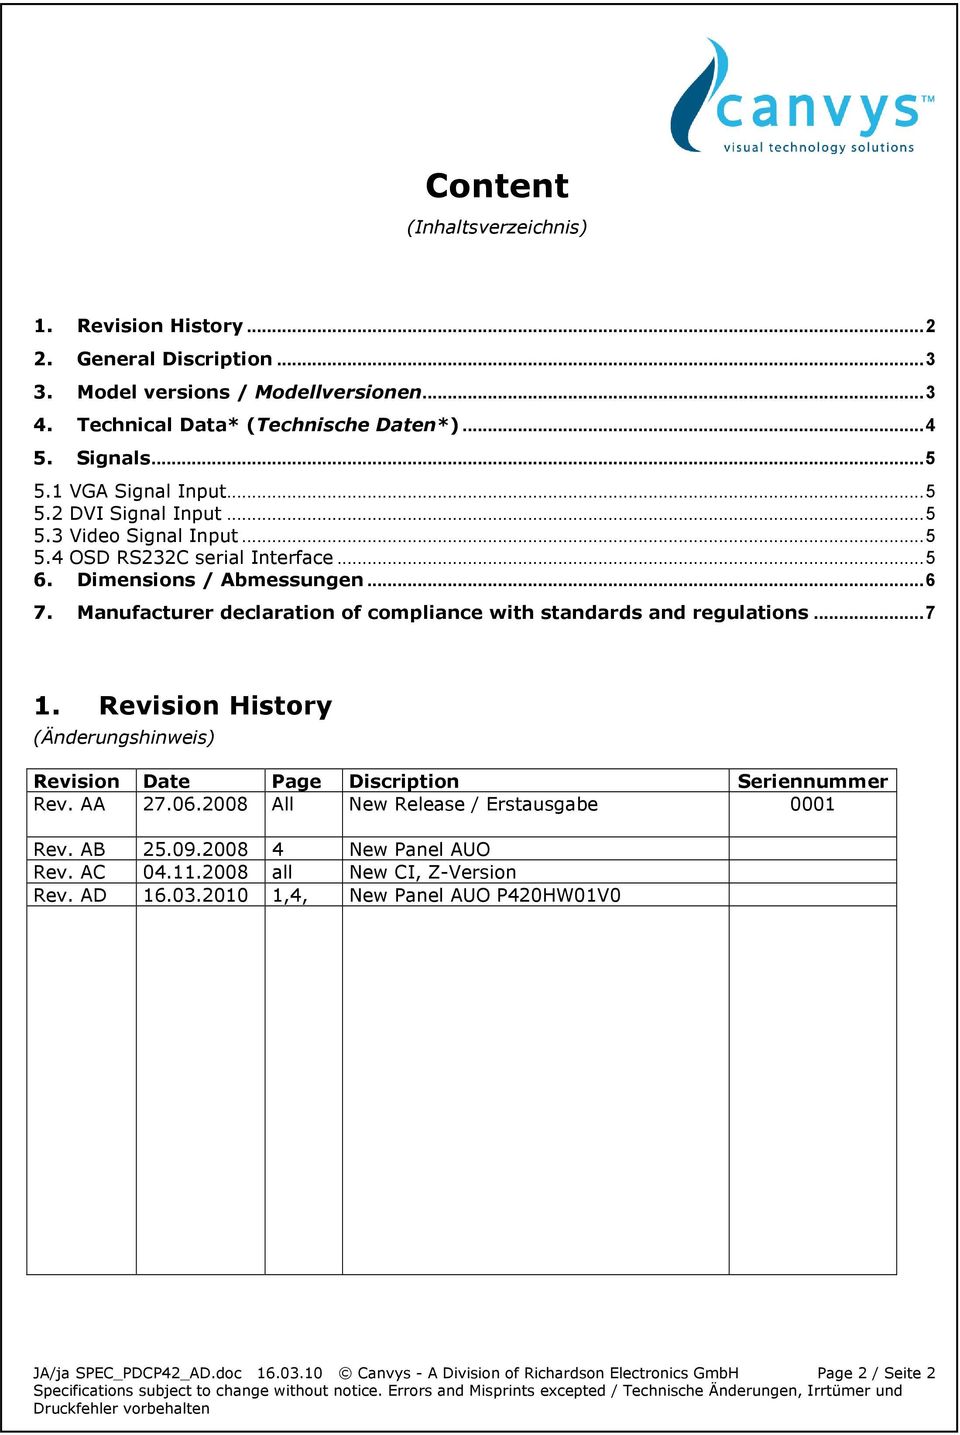 Manufacturer declaration of compliance with standards and regulations...7 1. Revision History (Änderungshinweis) Revision Date Page Discription Seriennummer Rev. AA 27.06.